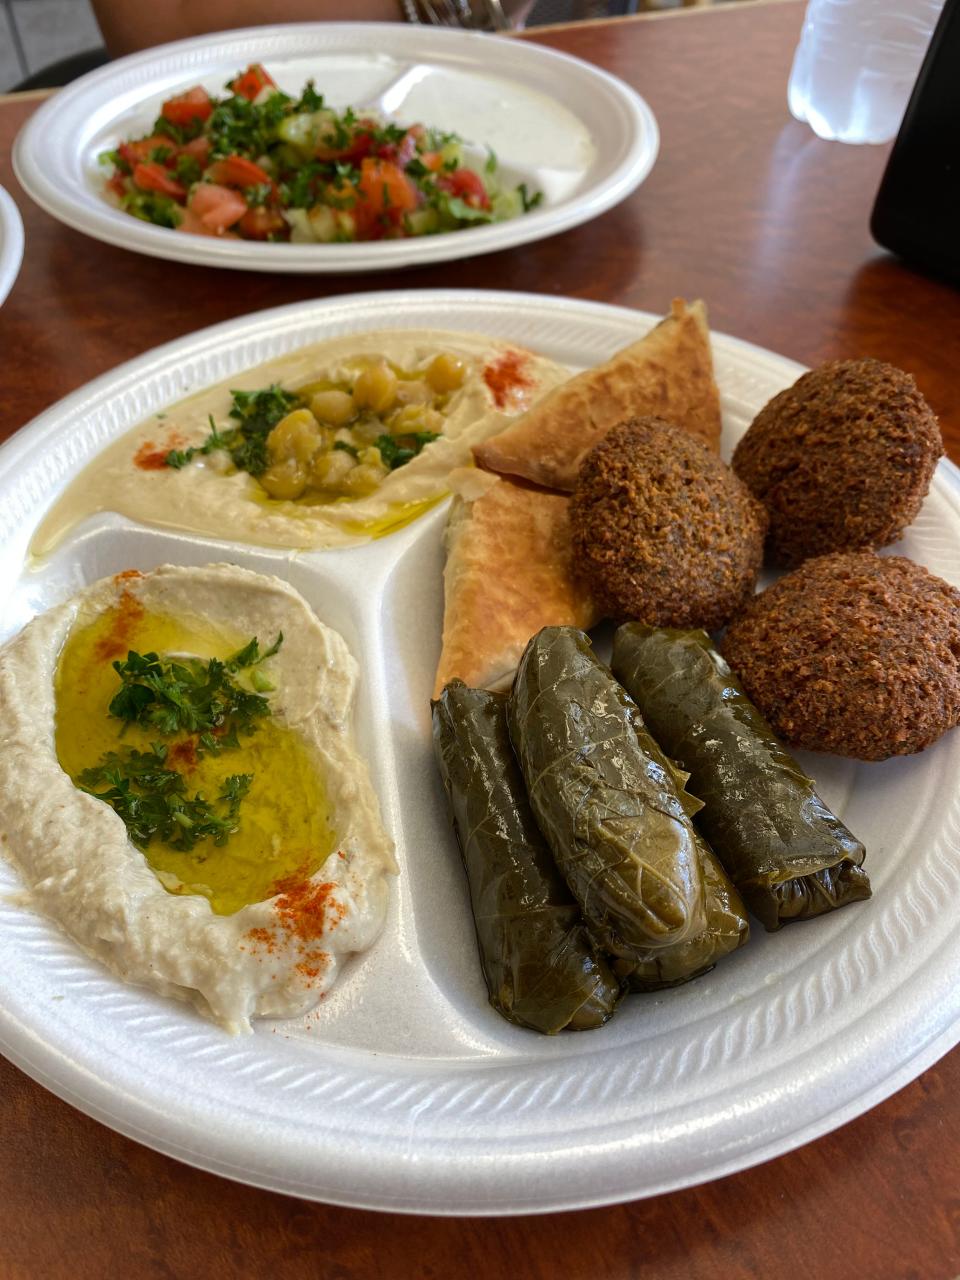 The Vegetable Deal at Castle Restaurant in Memphis, TN. This sampler plate comes with hummus, baba ganoush (eggplant dip), falafel, dolmades (stuffed grape leaves), spanakopita and pita bread.